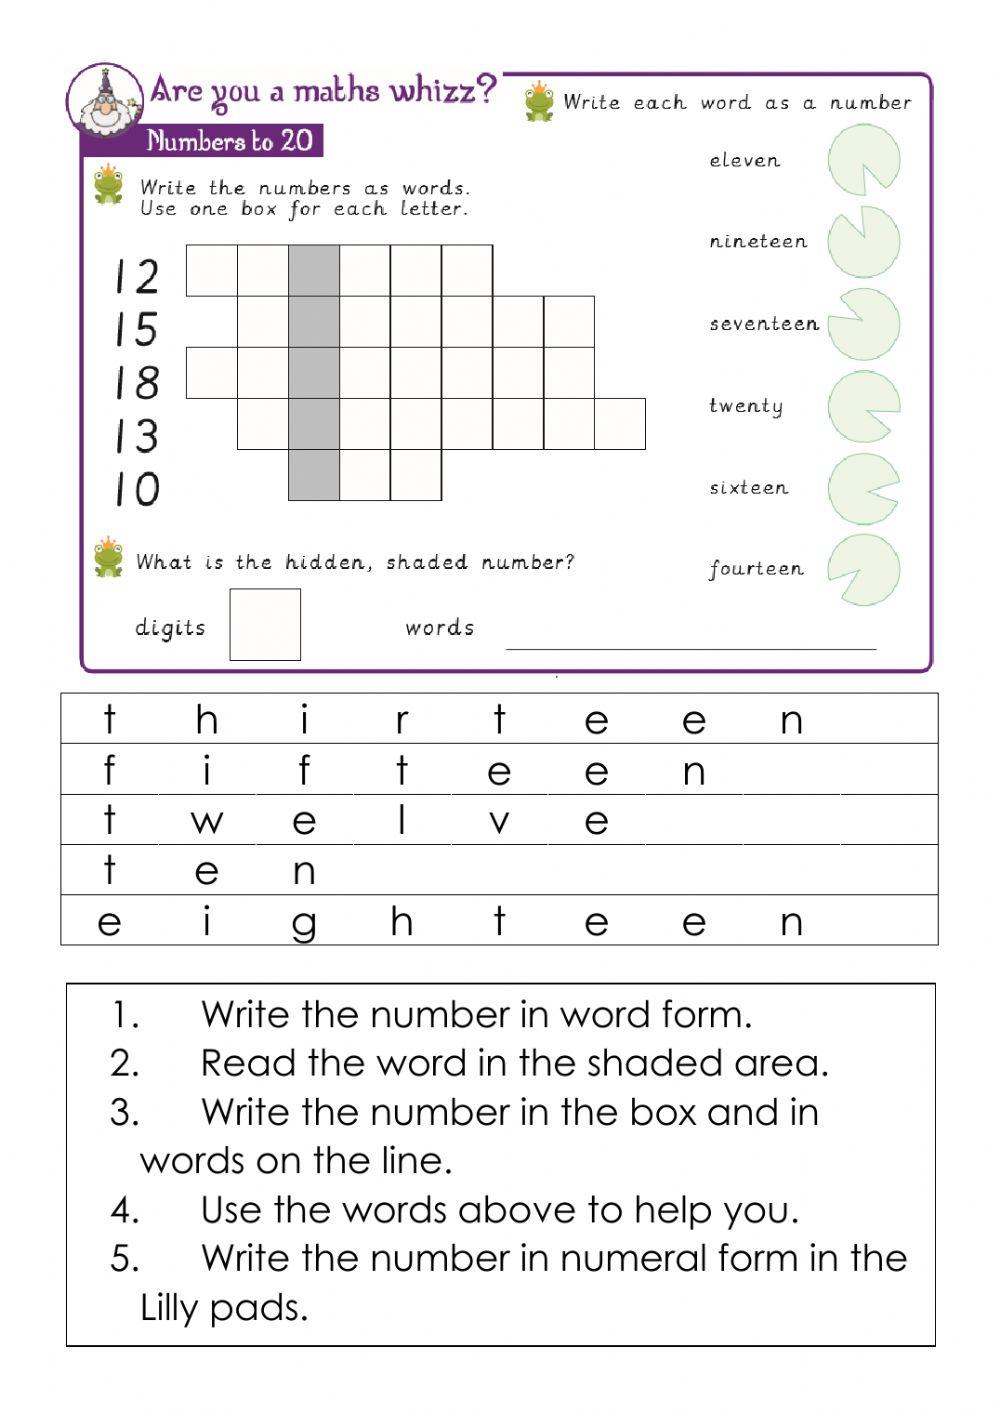 Numbers in word form puzzle